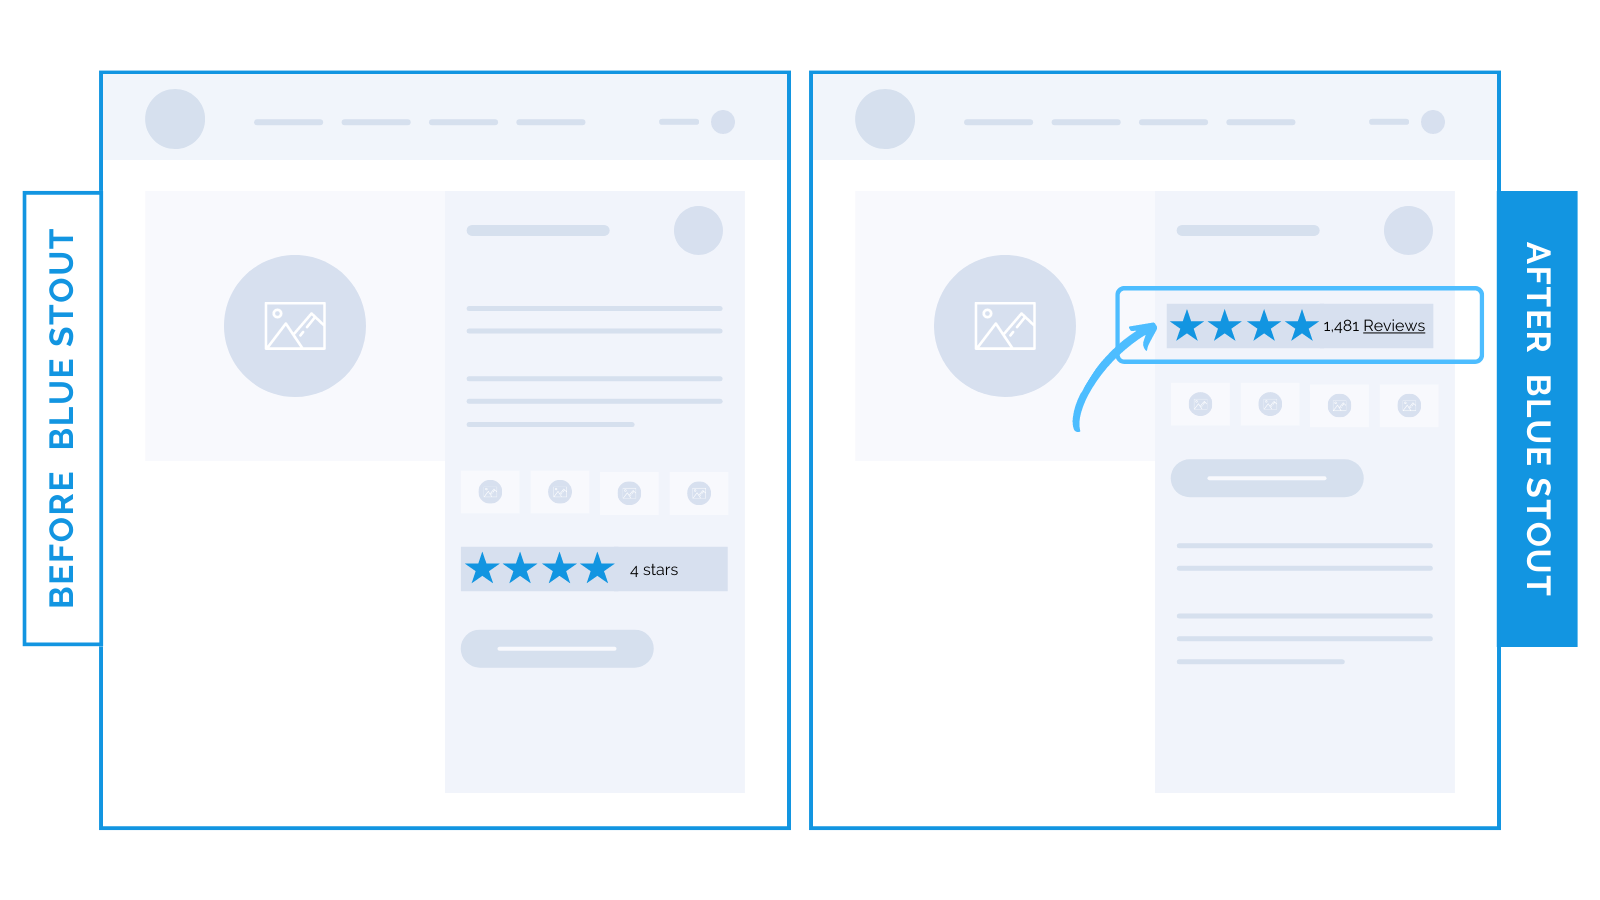 The 4 proven yet unlikely ways to leverage reviews for site conversions.